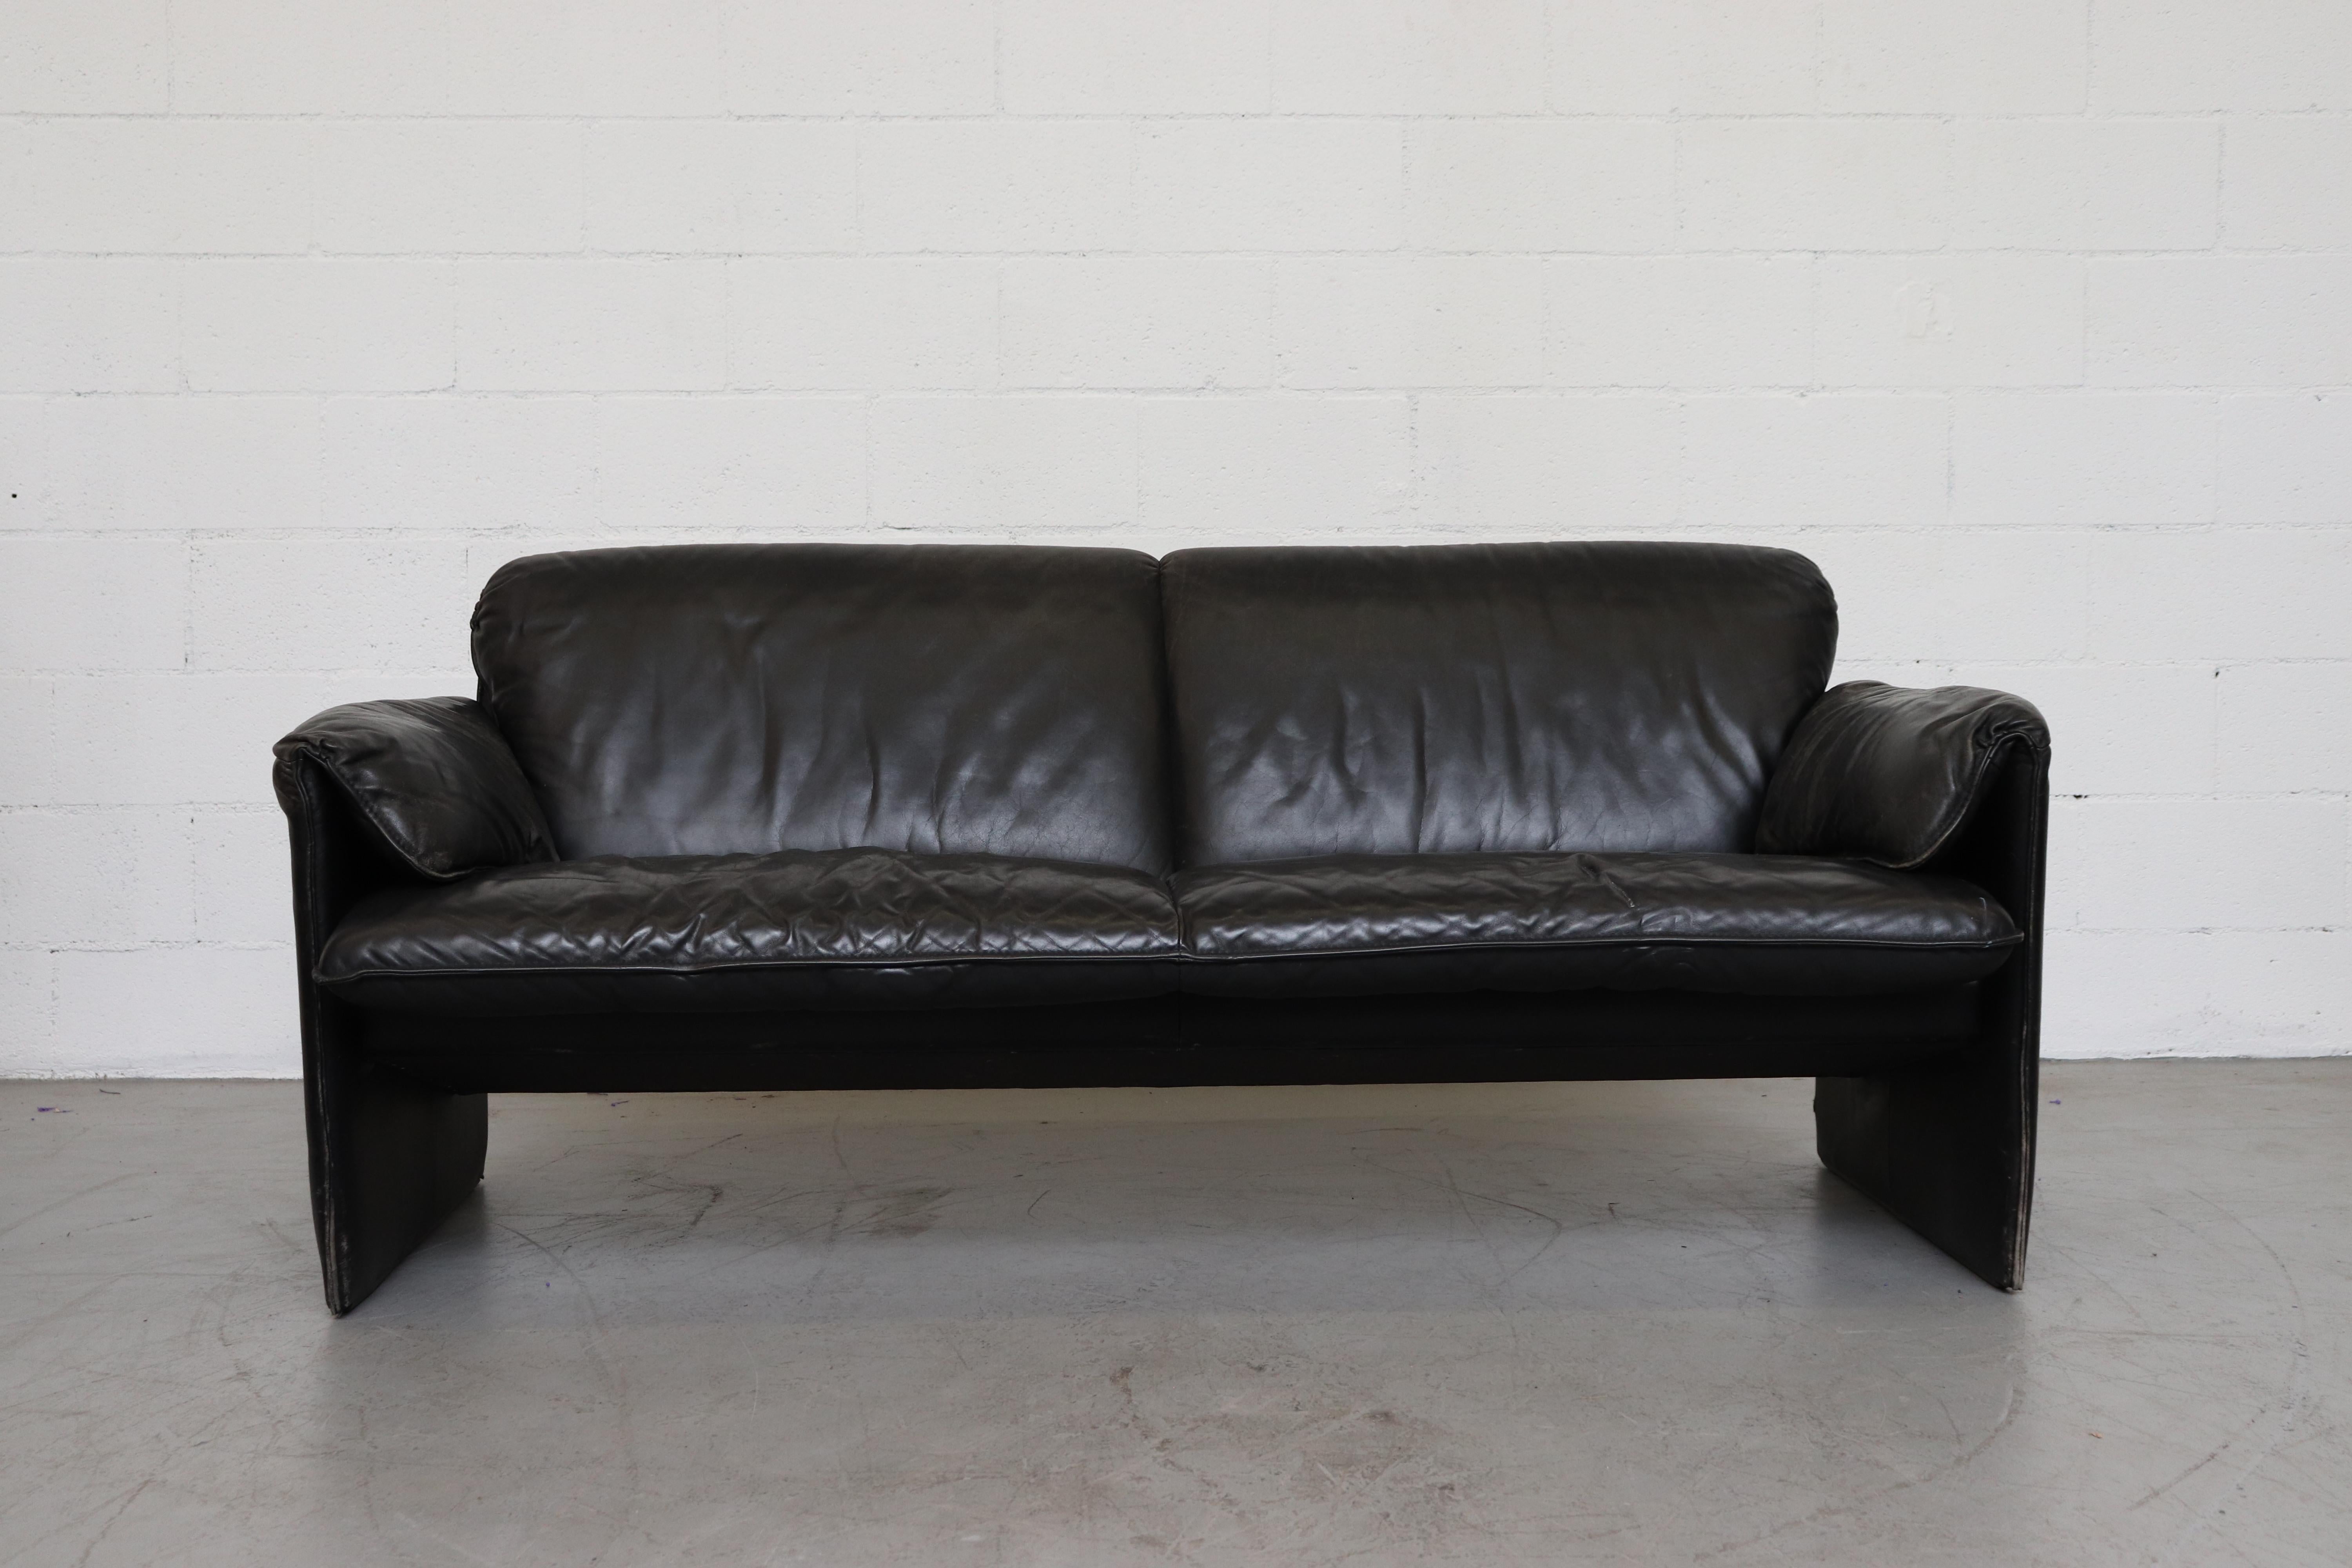 Gorgeous black leather 'Bora Bora' 2-seat sofa by Leolux. In original condition with visible signs of wear.